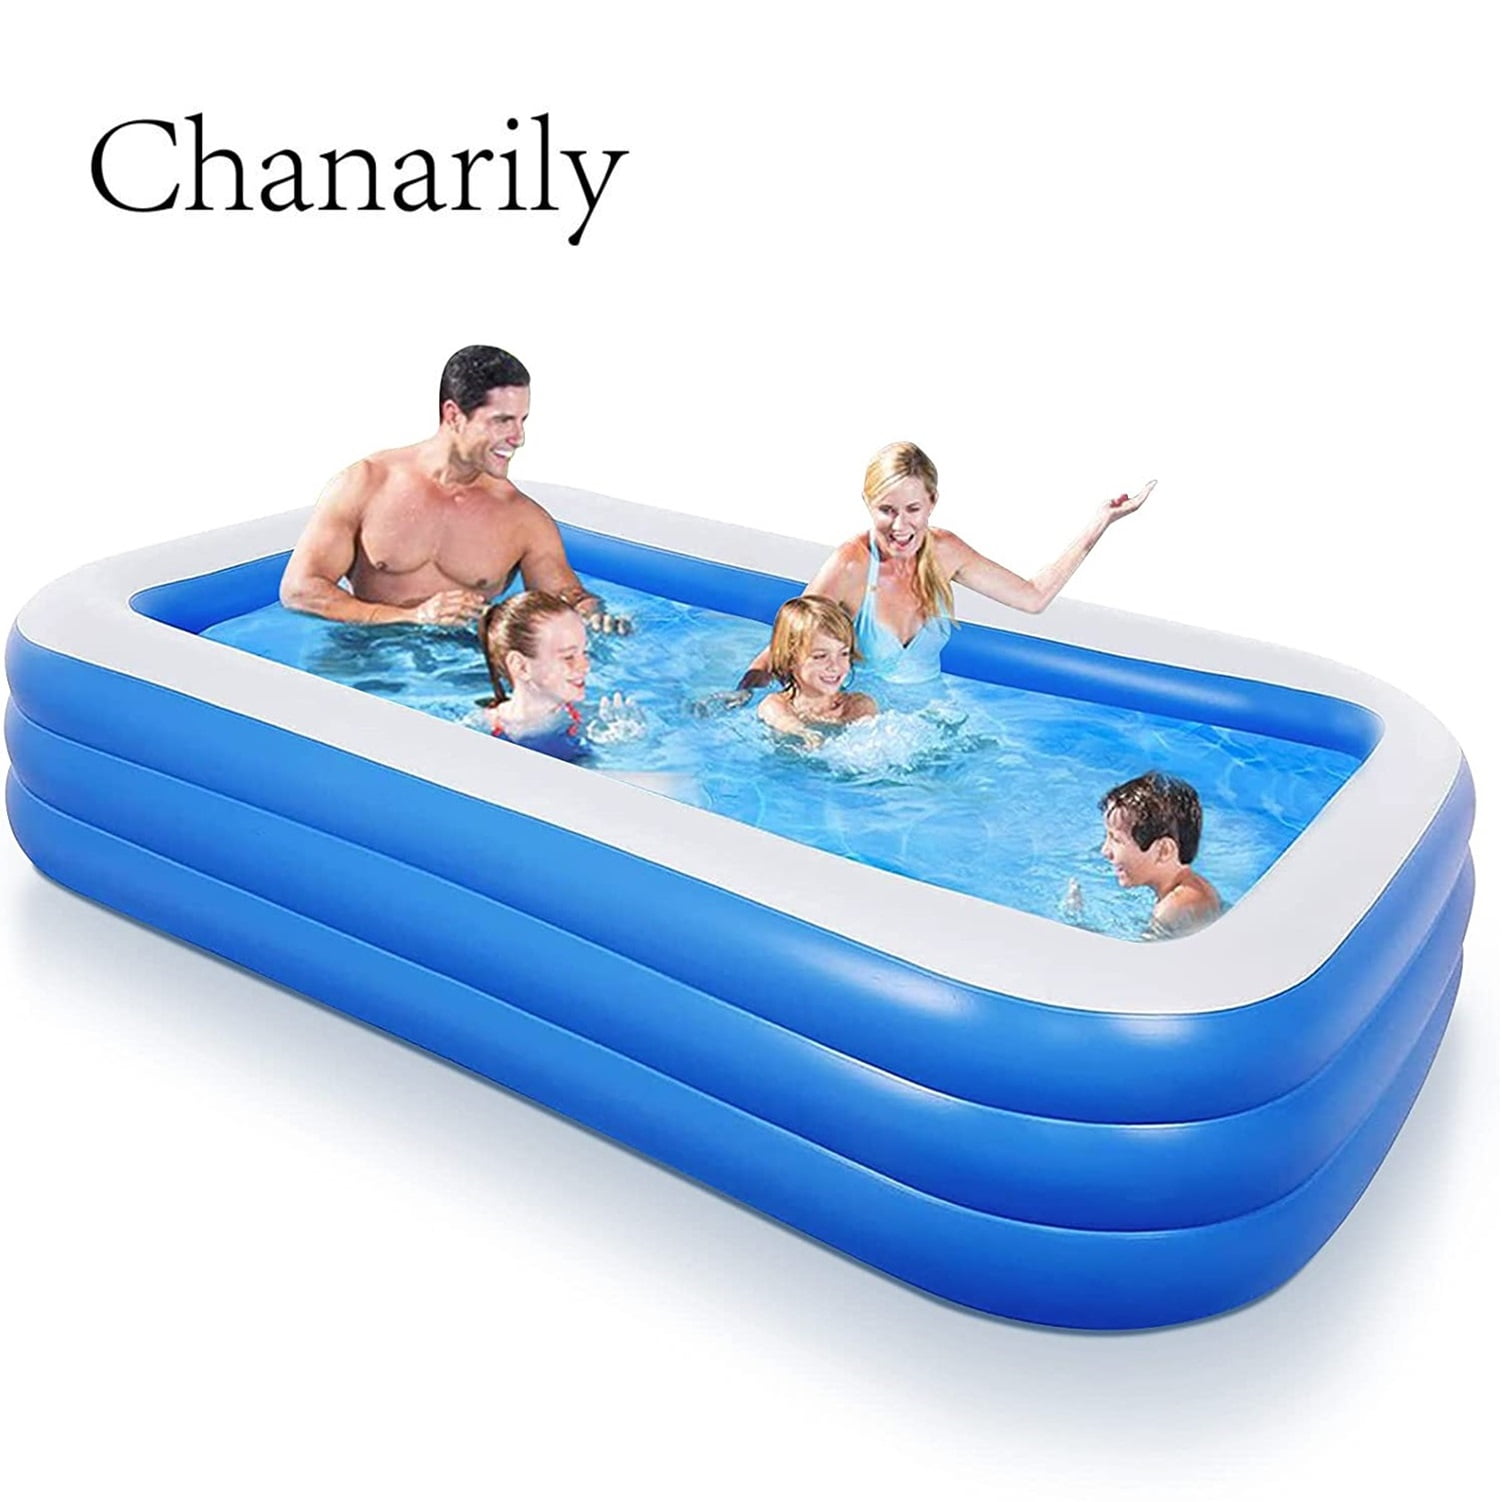 2-Layers Transparent Shui Latable Swimming Pool Large Leisure Transparent Swimming Pool Suitable for Family 200cm Garden Thickening Family Children Adult Outdoor Swimming Pool 78 Backyard 